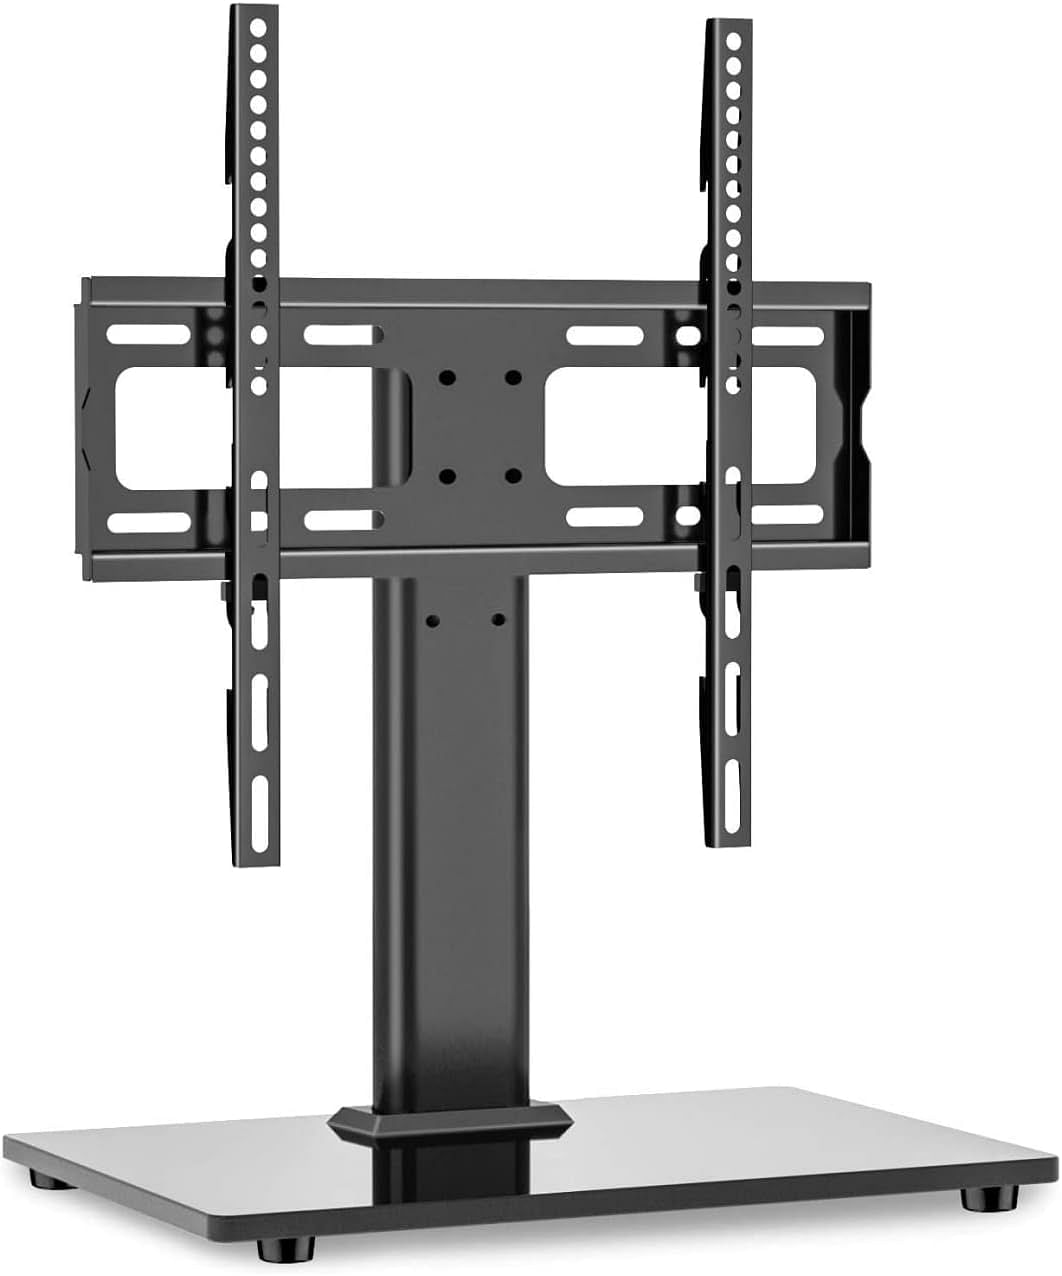 SKY-TOUCH Mobile TV Stand, Universal TV Mount Stands with Bracket for 32-65 inch LCD LED TVs, Height Adjustable TV Base Stand Holds 45 KG & Max, VESA 600x400mm